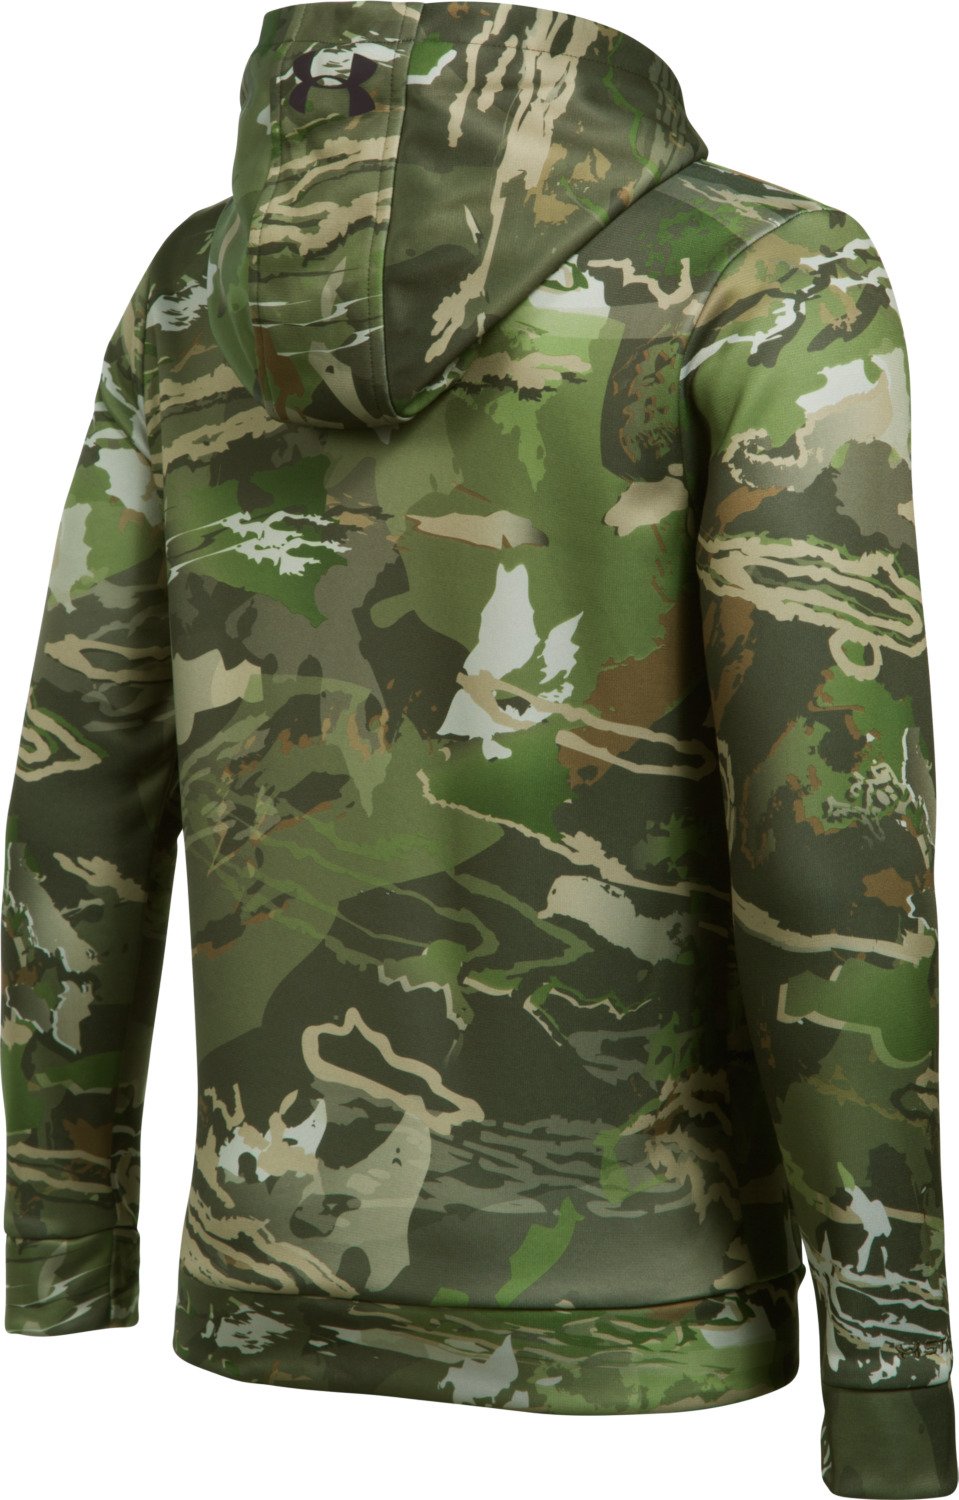 Cheap under armour storm hoodie camo 